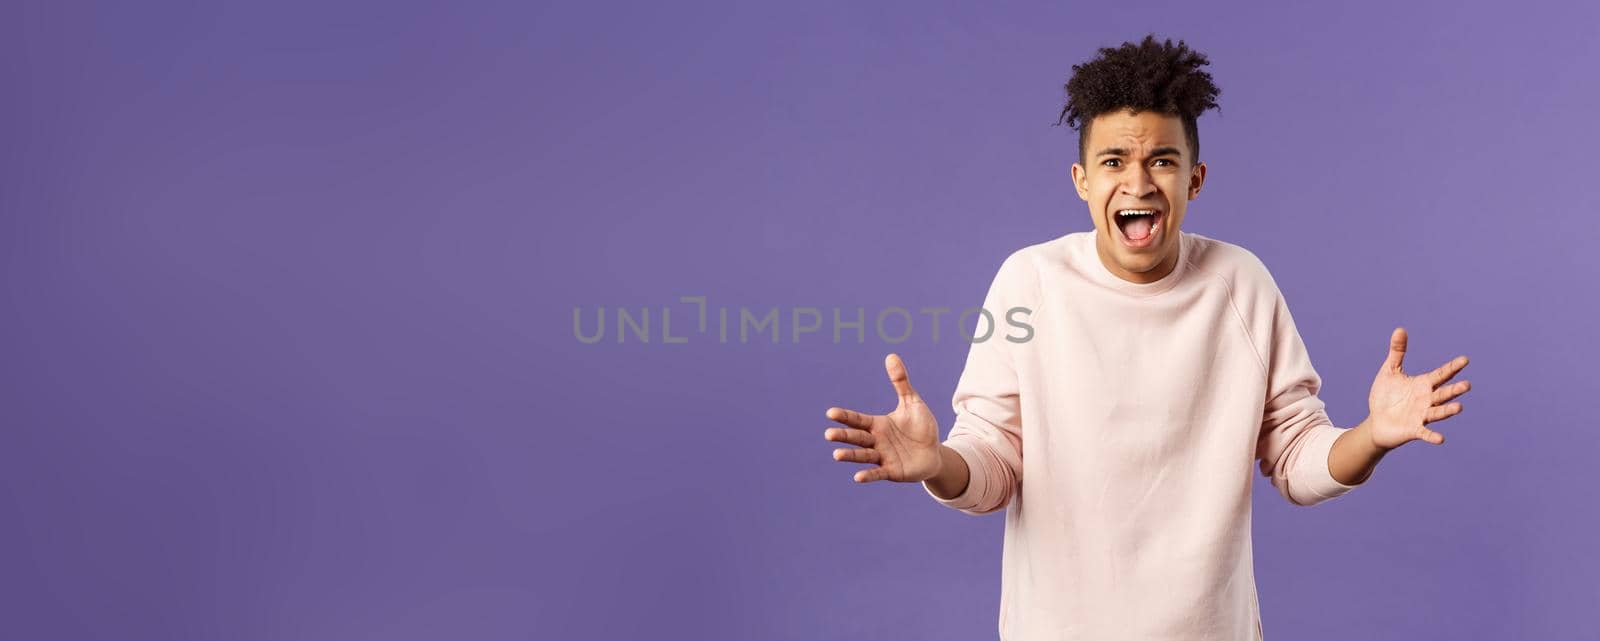 Portrait of concerned, upset and frustrated young man cant believe he lost, asking why, spread hands sideways in dismay, complaining shouting angry and uneasy, standing purple background.